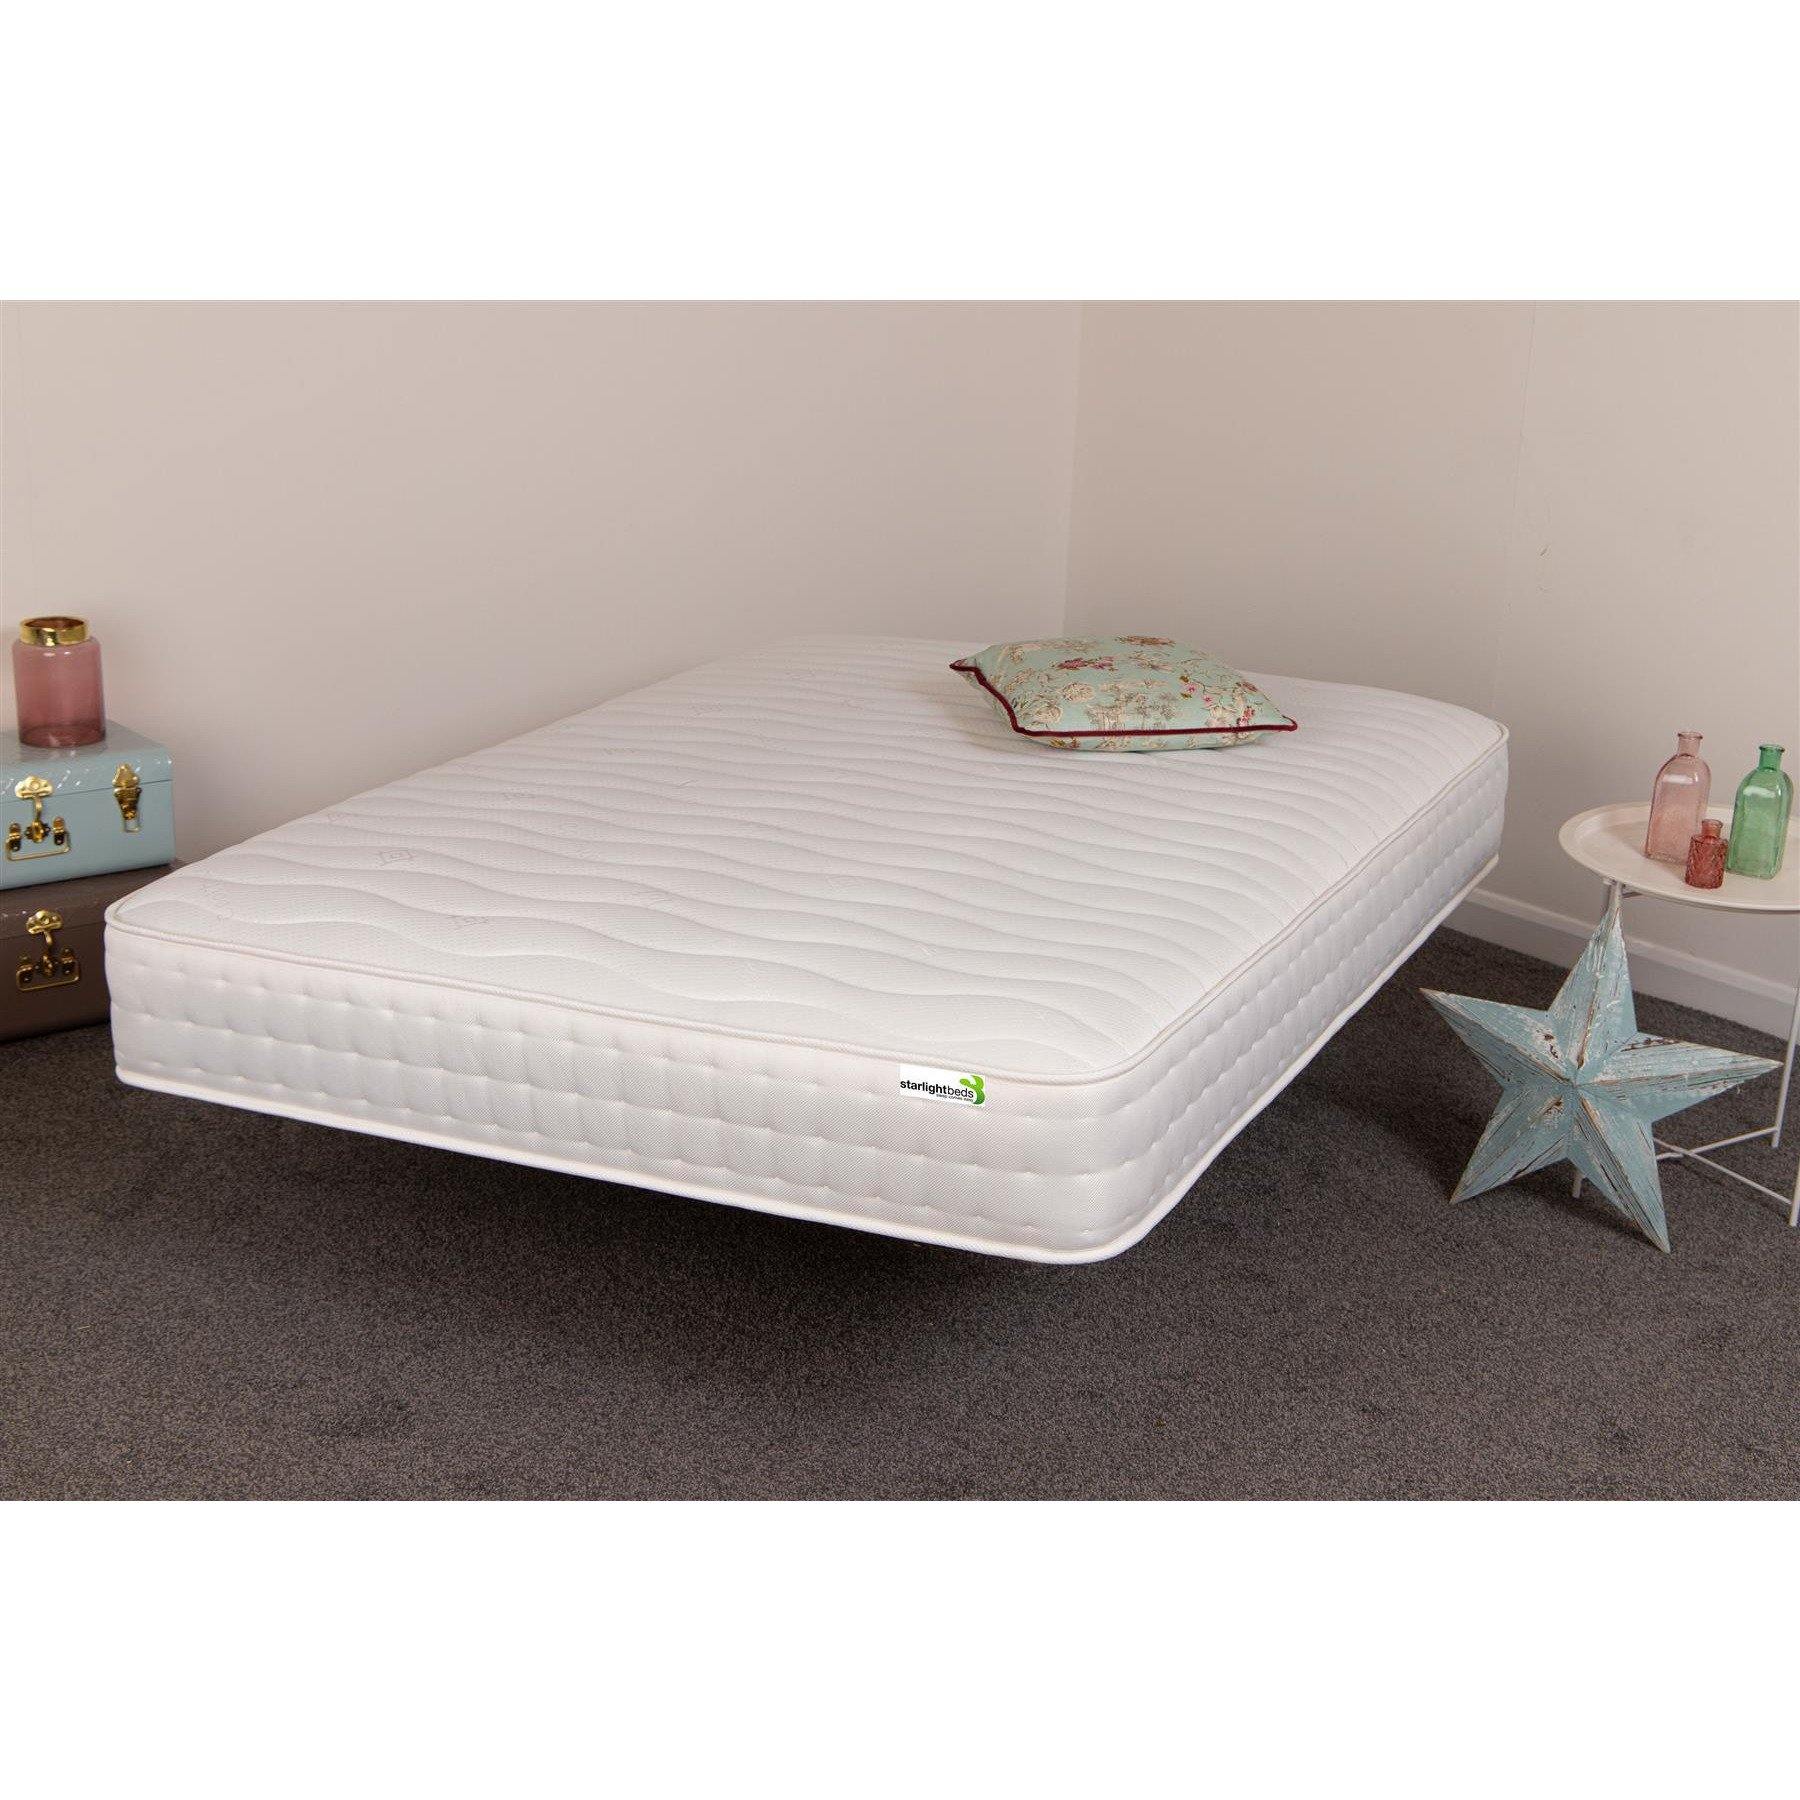 Starlight Beds™ | Side Stitched Spring & Memory Foam Mattress